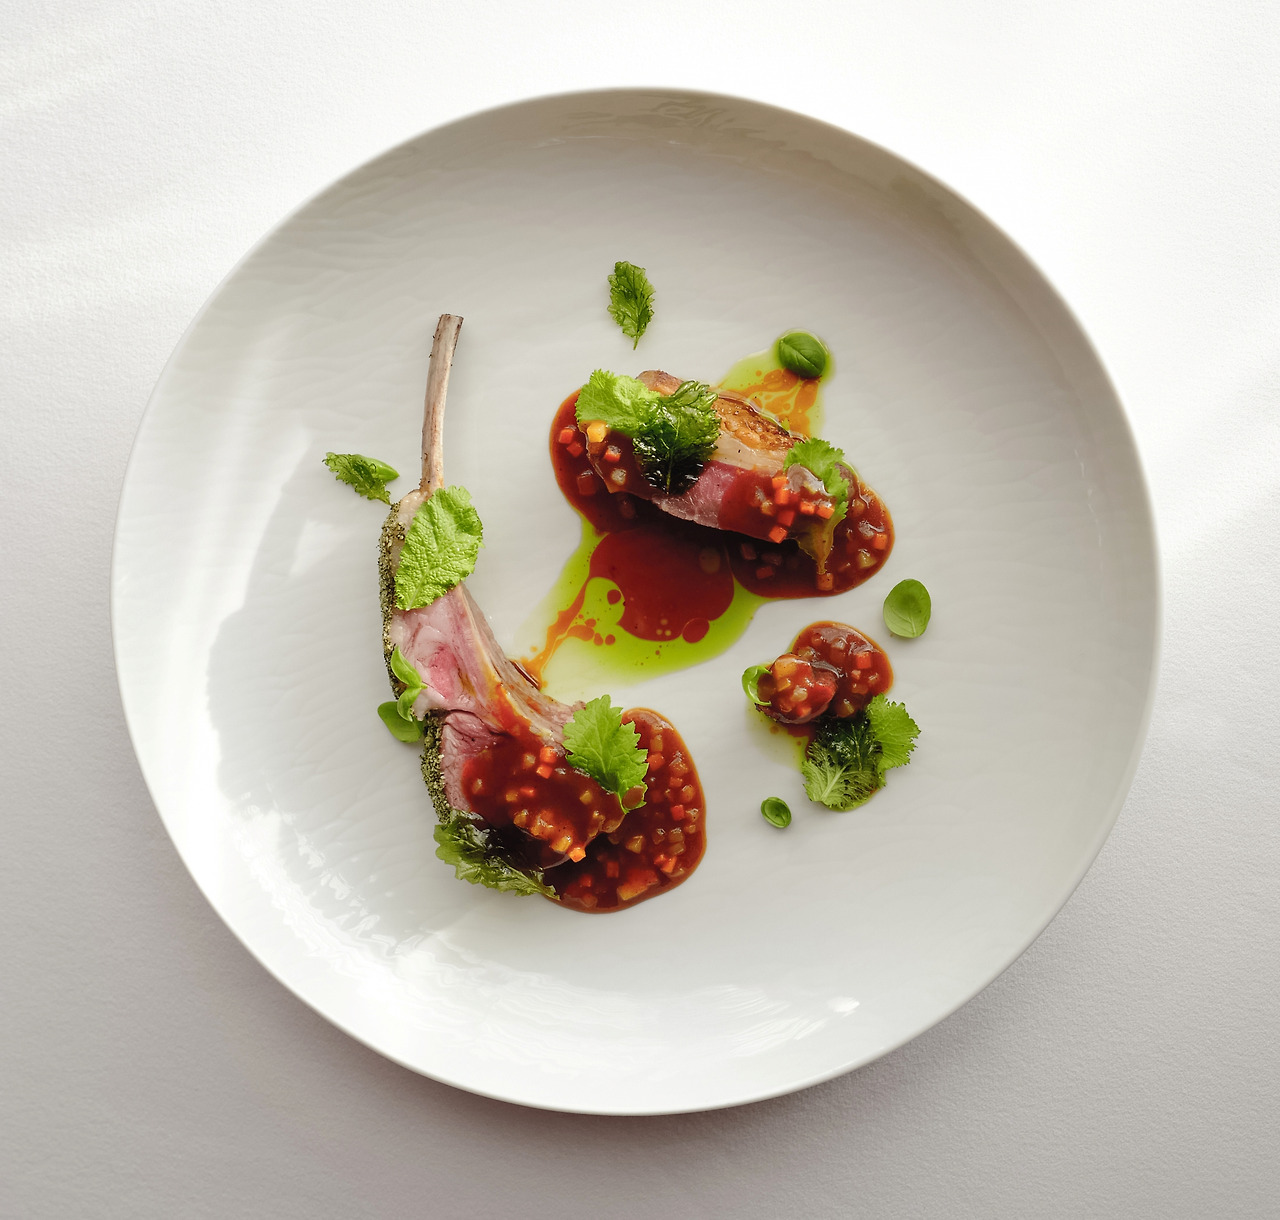 Lamb dish inspired by a description of lamb stew from an Ernest Hemingway novel ⓒL’Amant Secret